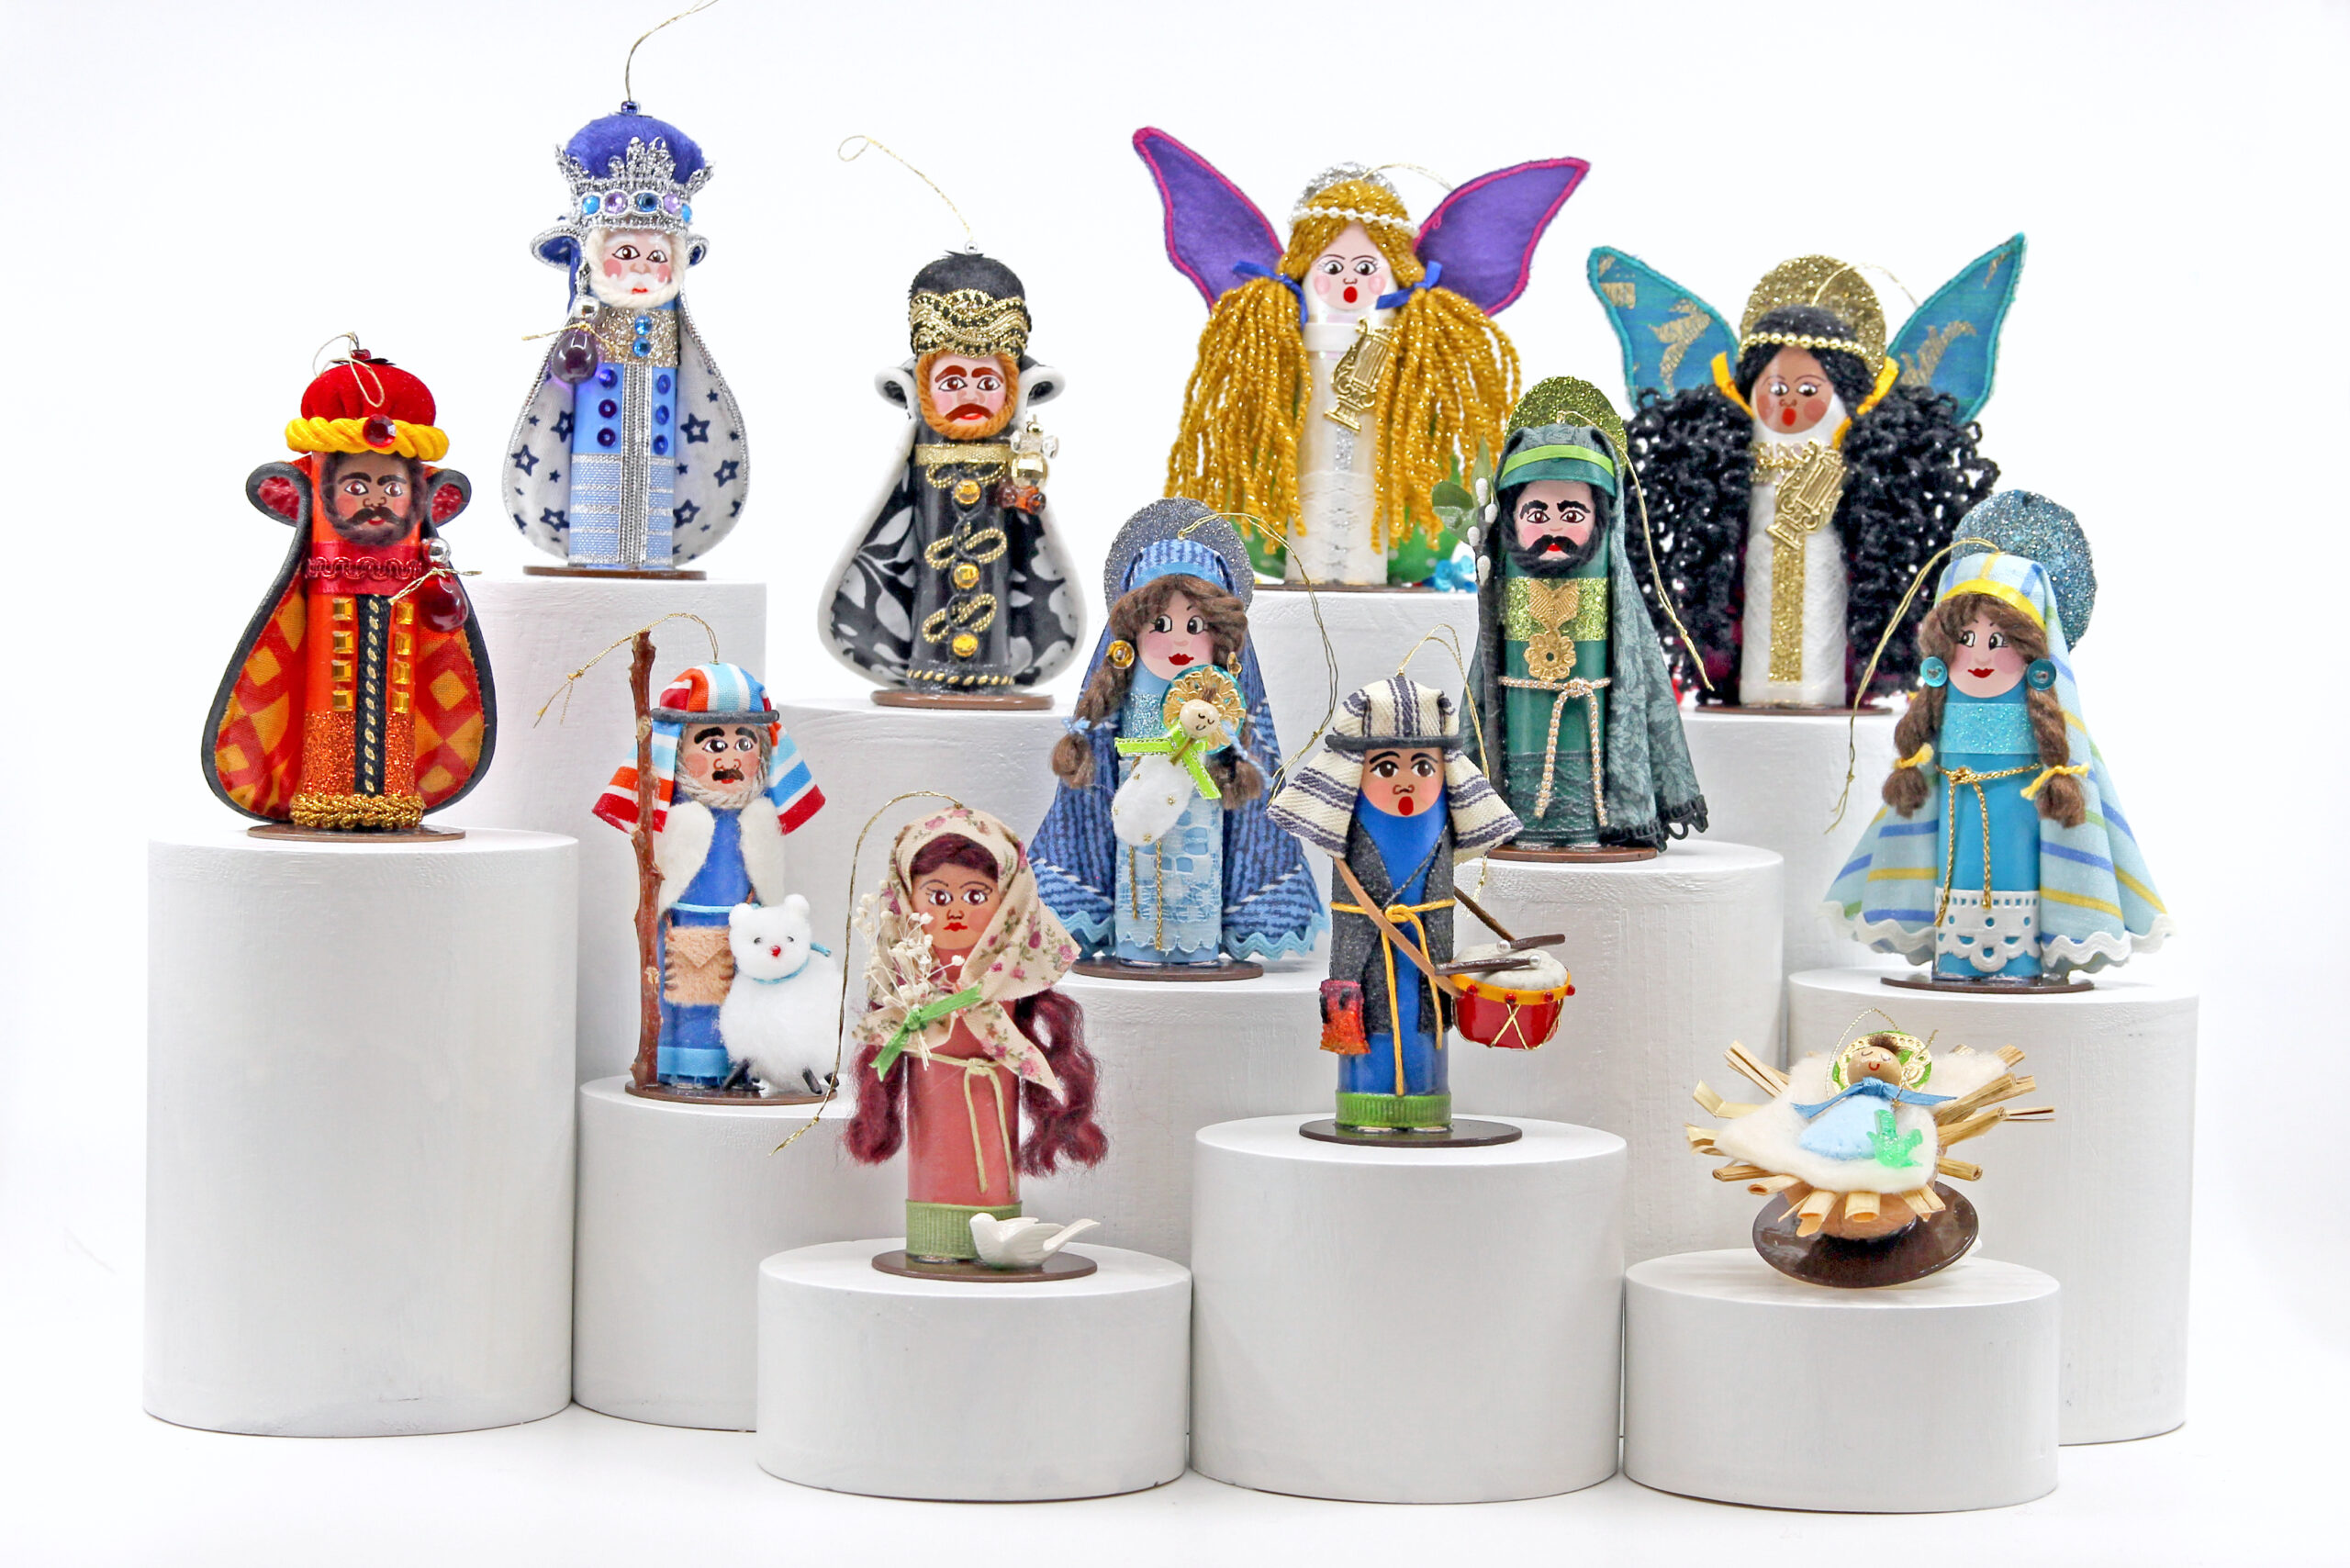 The Nativity Ornaments Collection